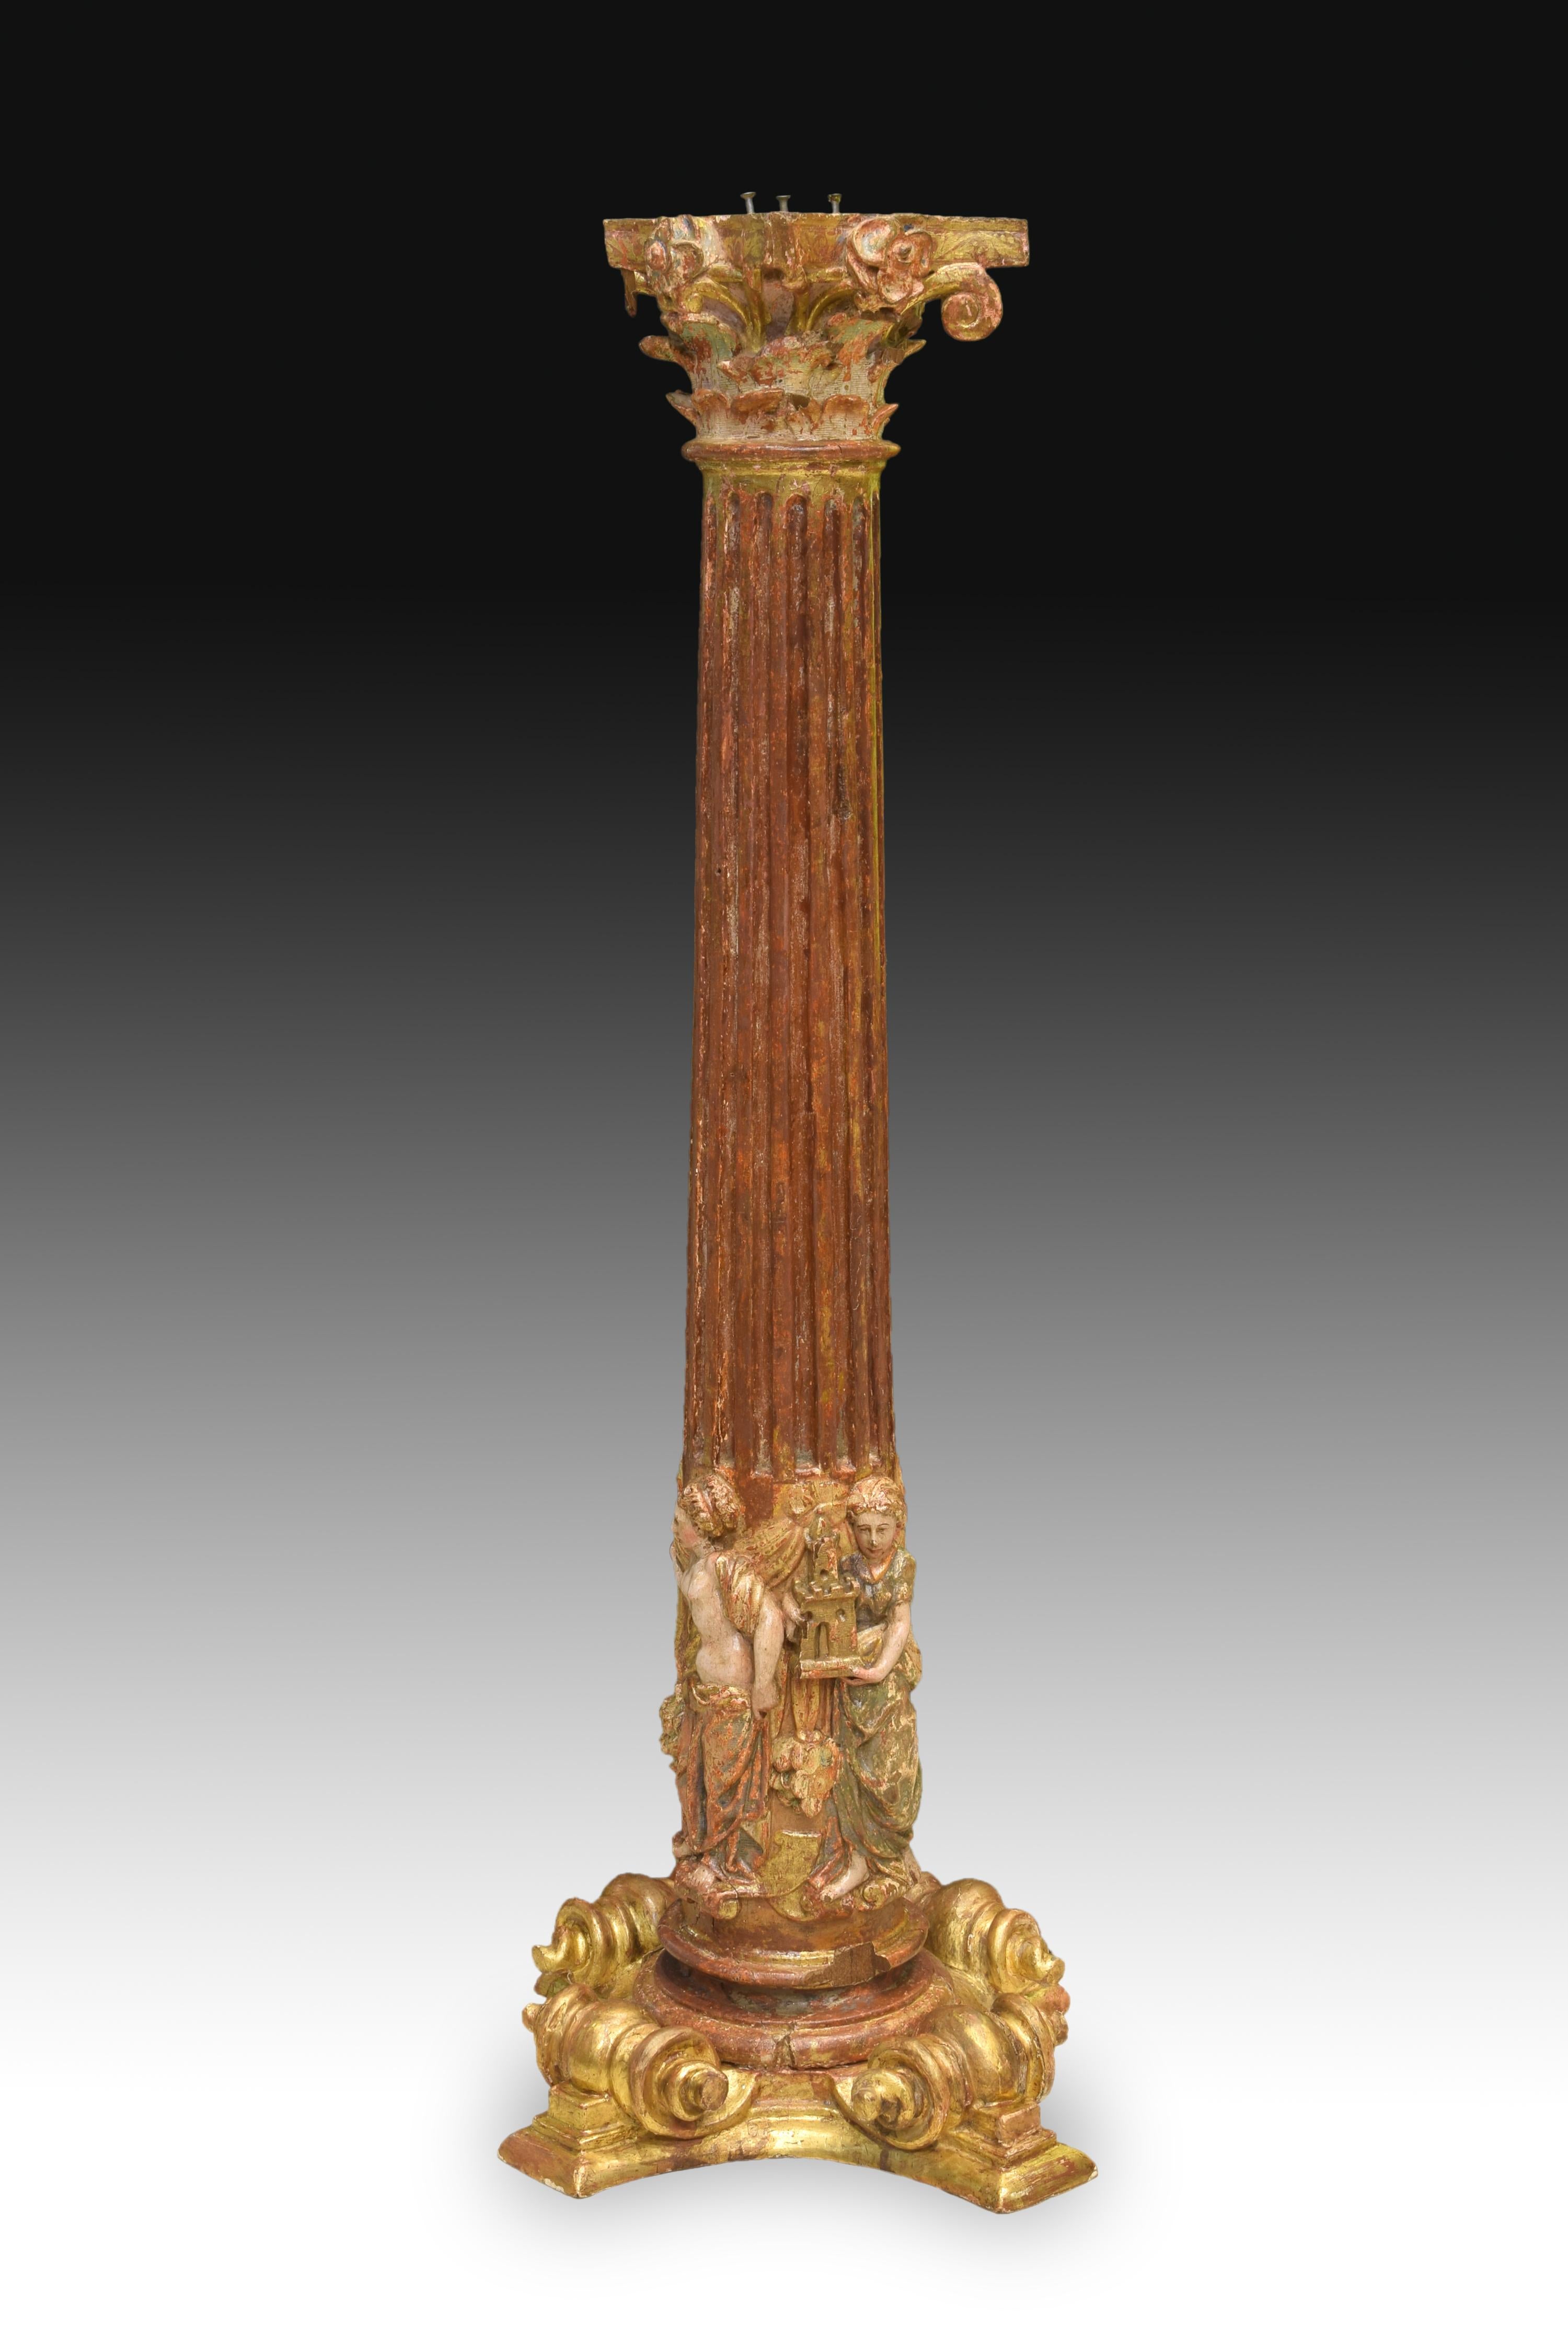 Column of carved and polychrome wood that has a capital reminiscent of the classical order (volutes, acanthus leaves in levels), a series of moldings separating the shaft from the rest of the elements, a fluted shaft with an área in the lower part